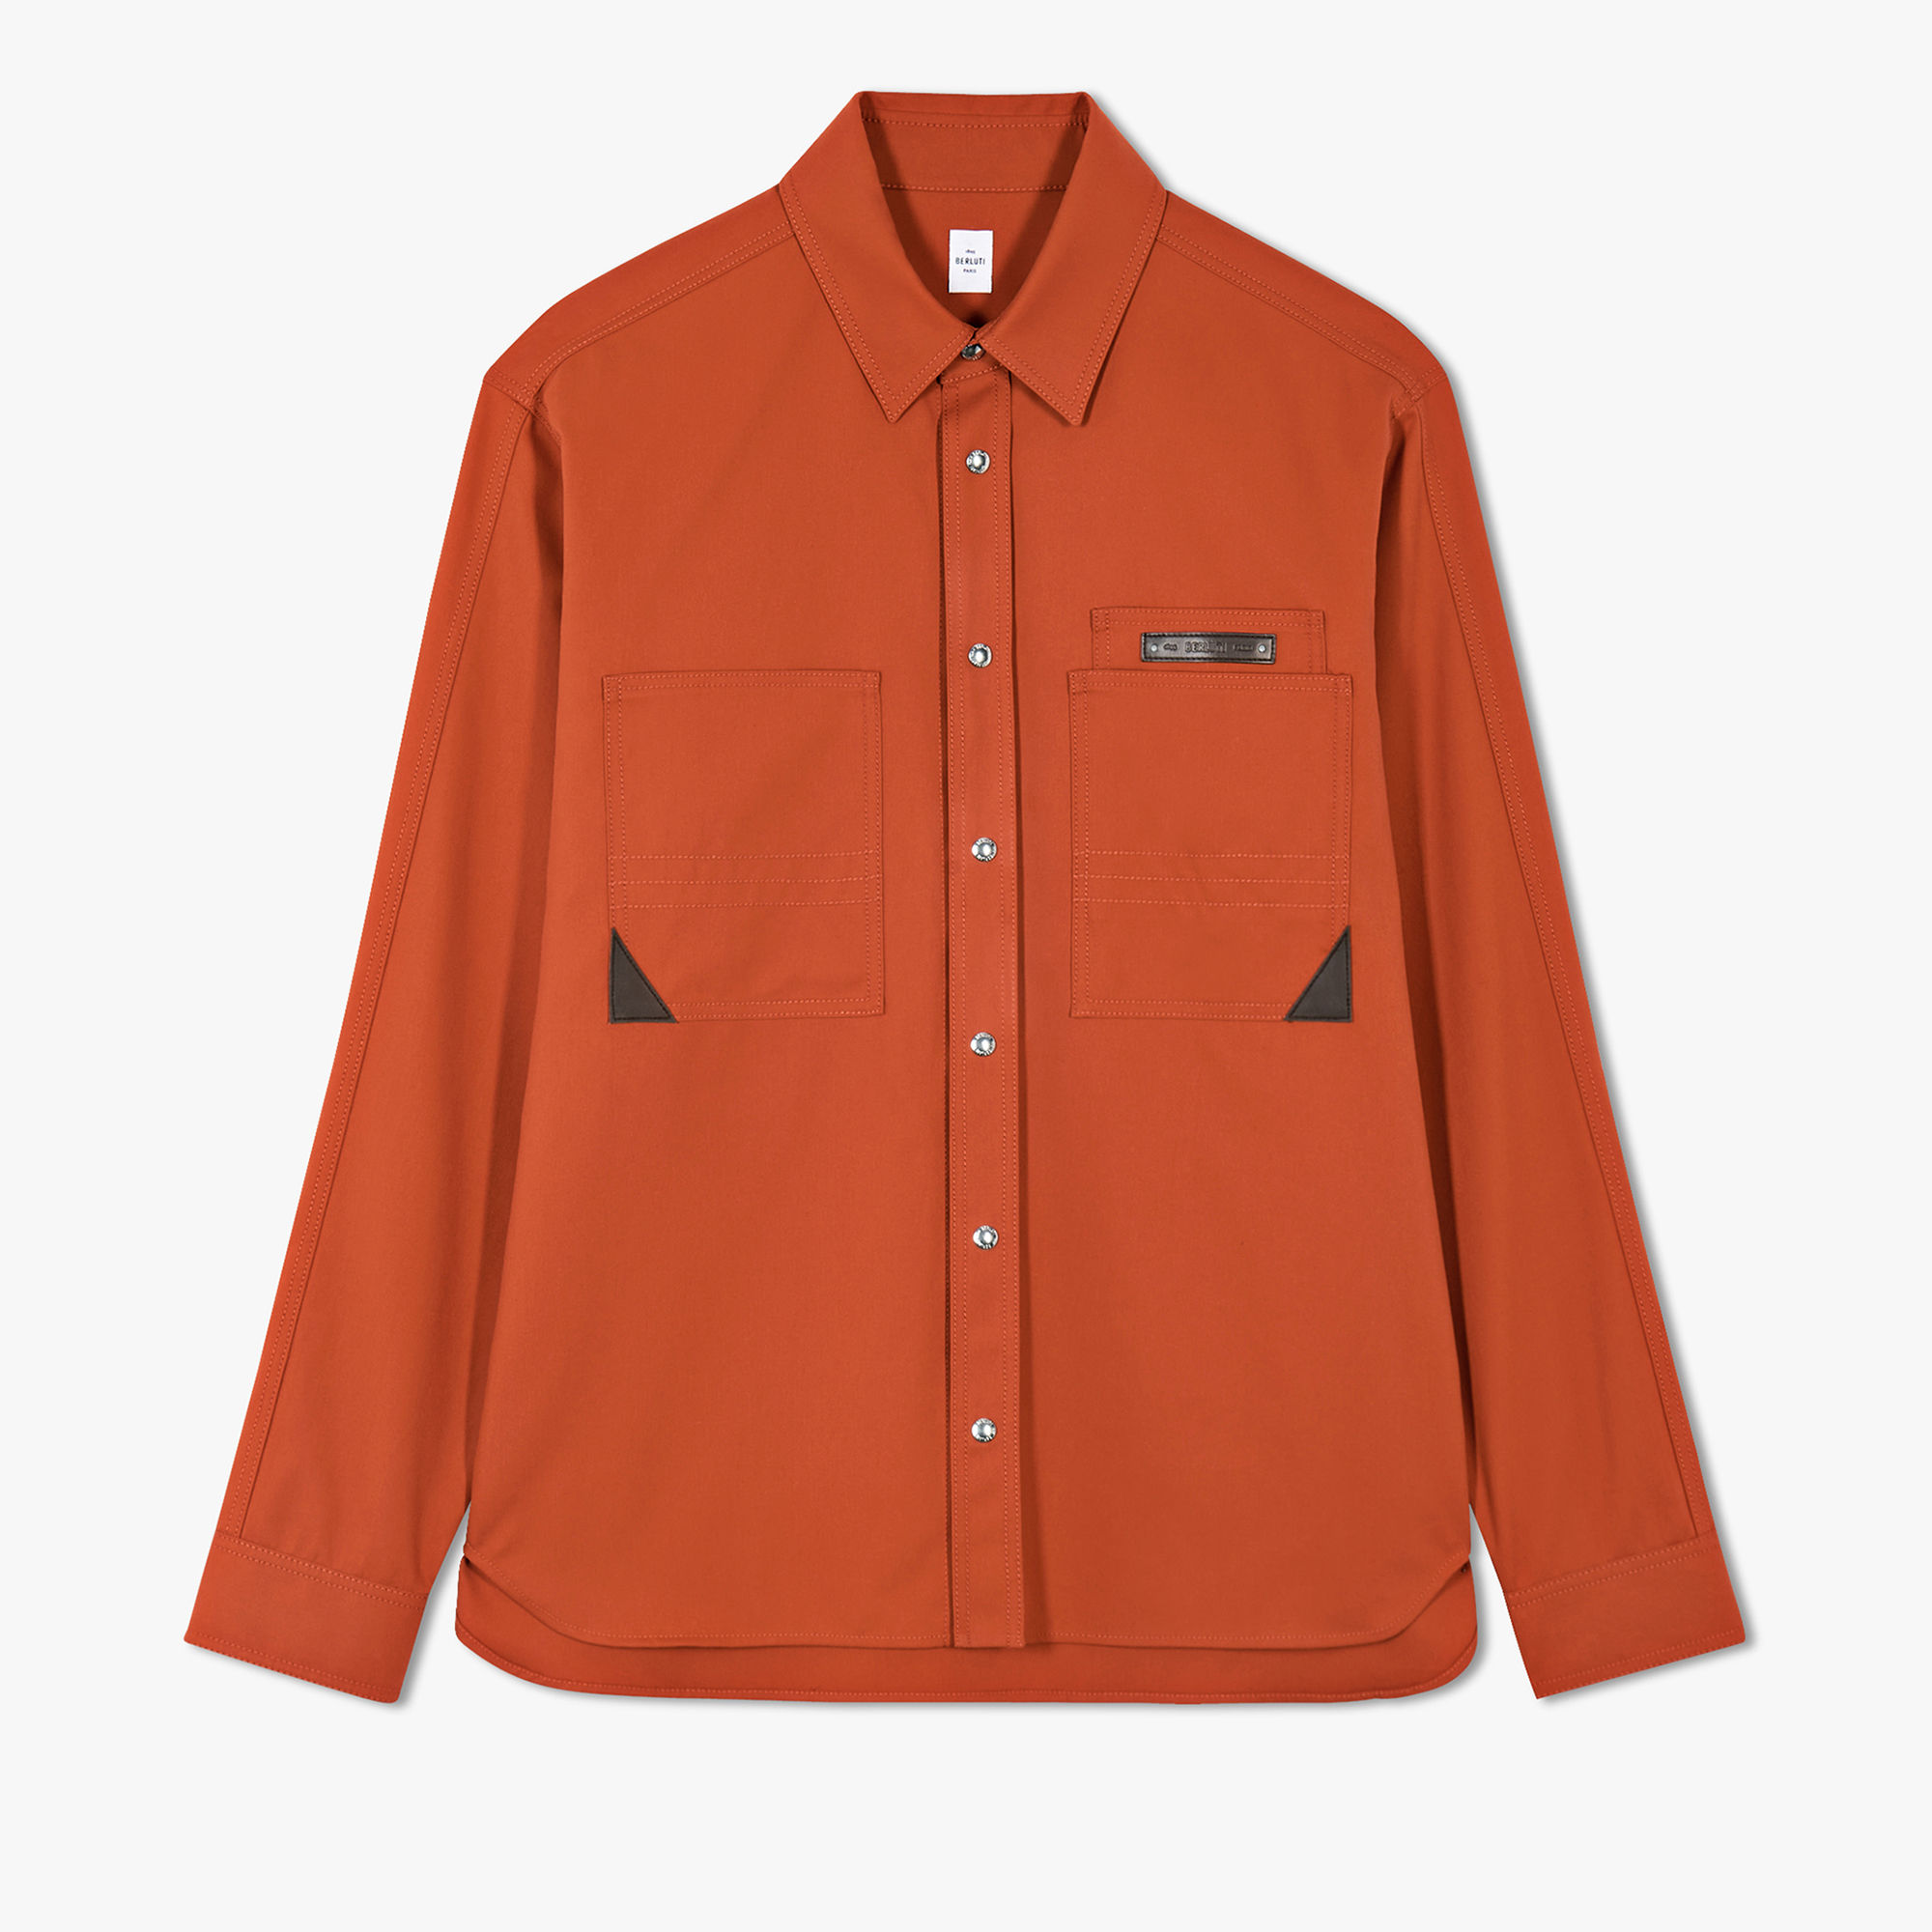 Cotton Overshirt With Leather Details, ORANGE RUST, hi-res